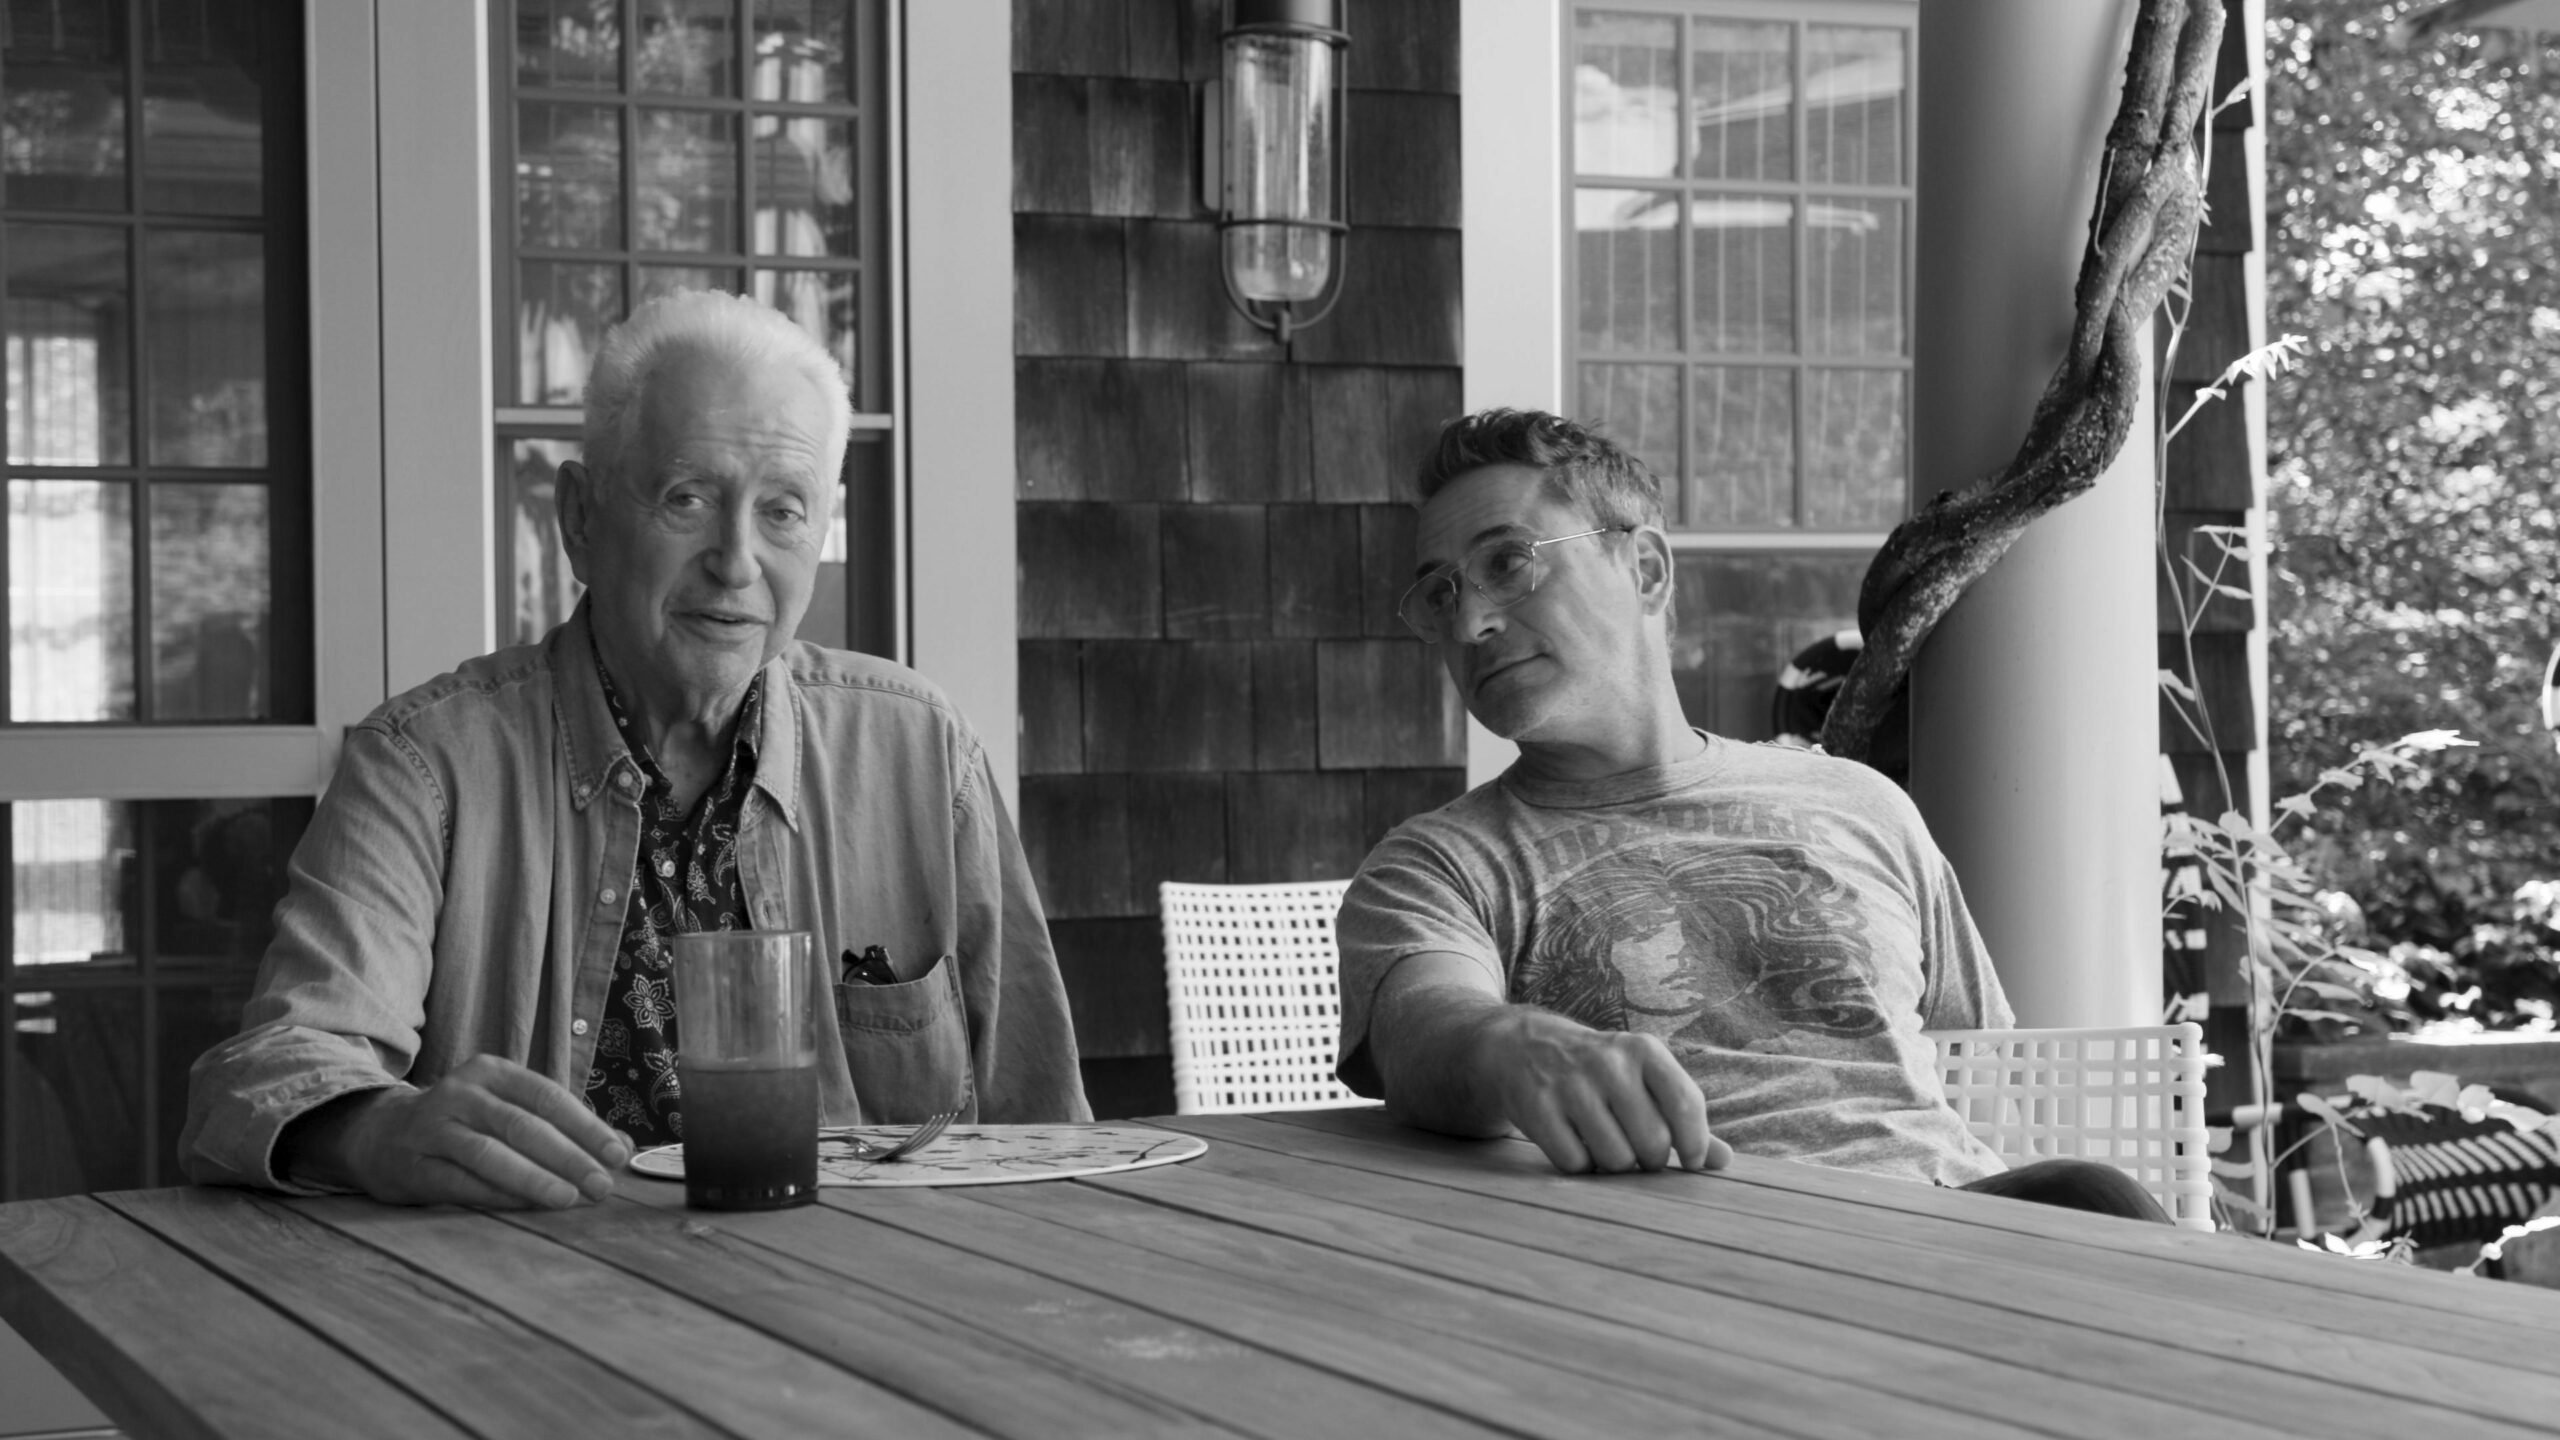 HIFF's Closing Night Film “Sr.,” directed by Chris Smith, is a portrait of the life and career of Robert Downey Sr., the visionary director who set the standard for counterculture comedy in the 1960s and ‘70s. COURTESY HIFF